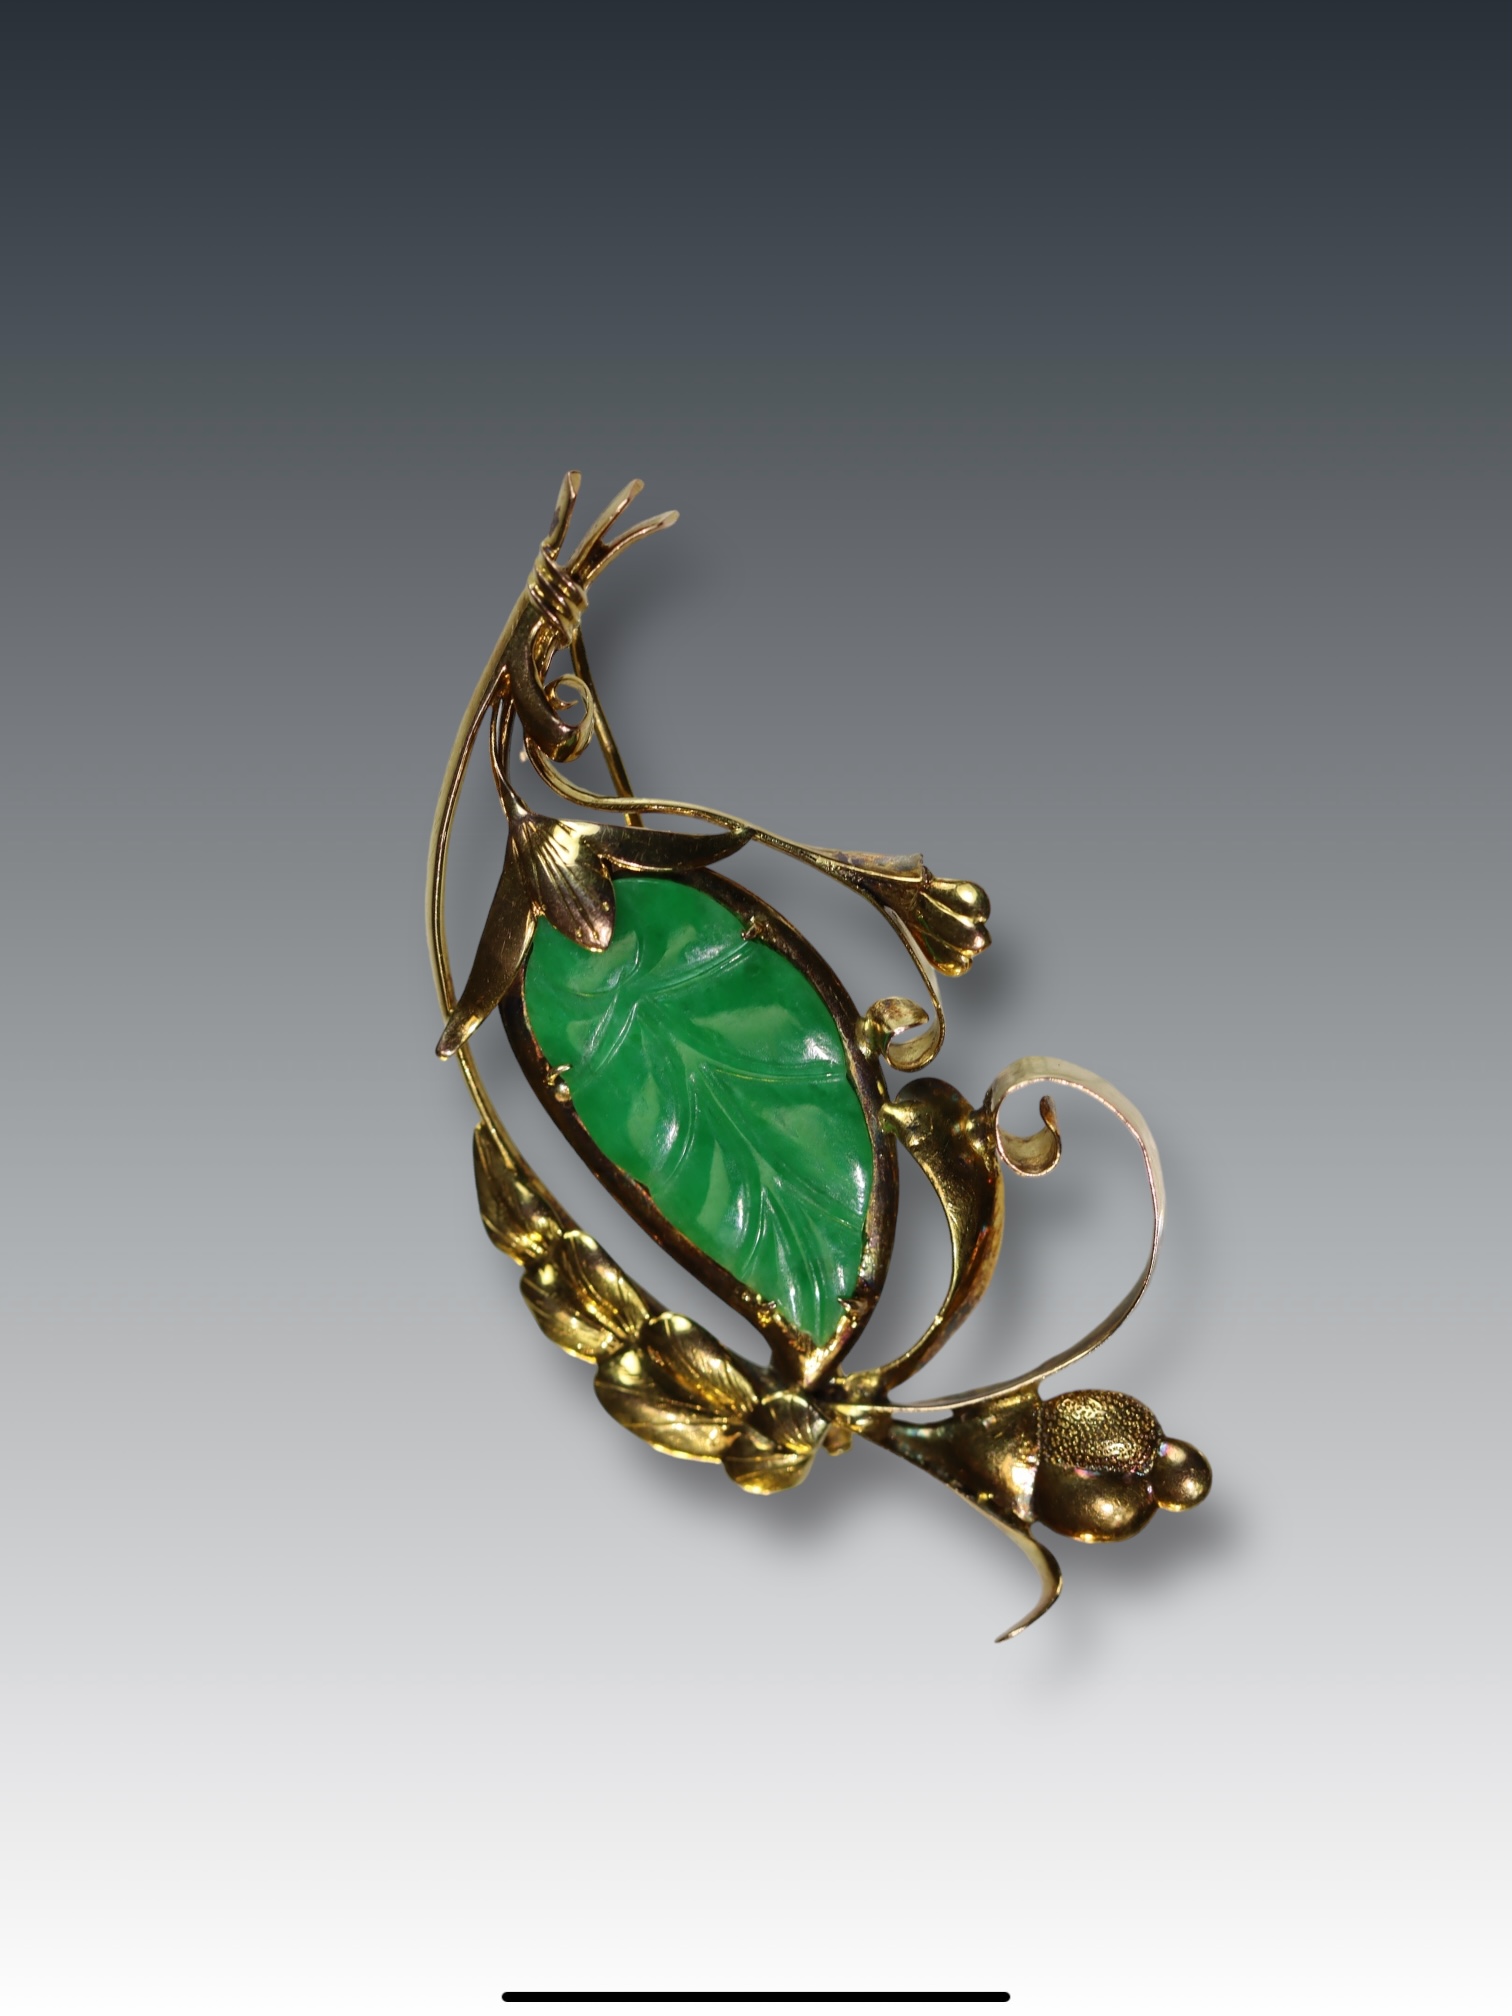 A 1940's Jadeite Brooch the strong apple green coloured jadeite carved as a leaf, with yellow